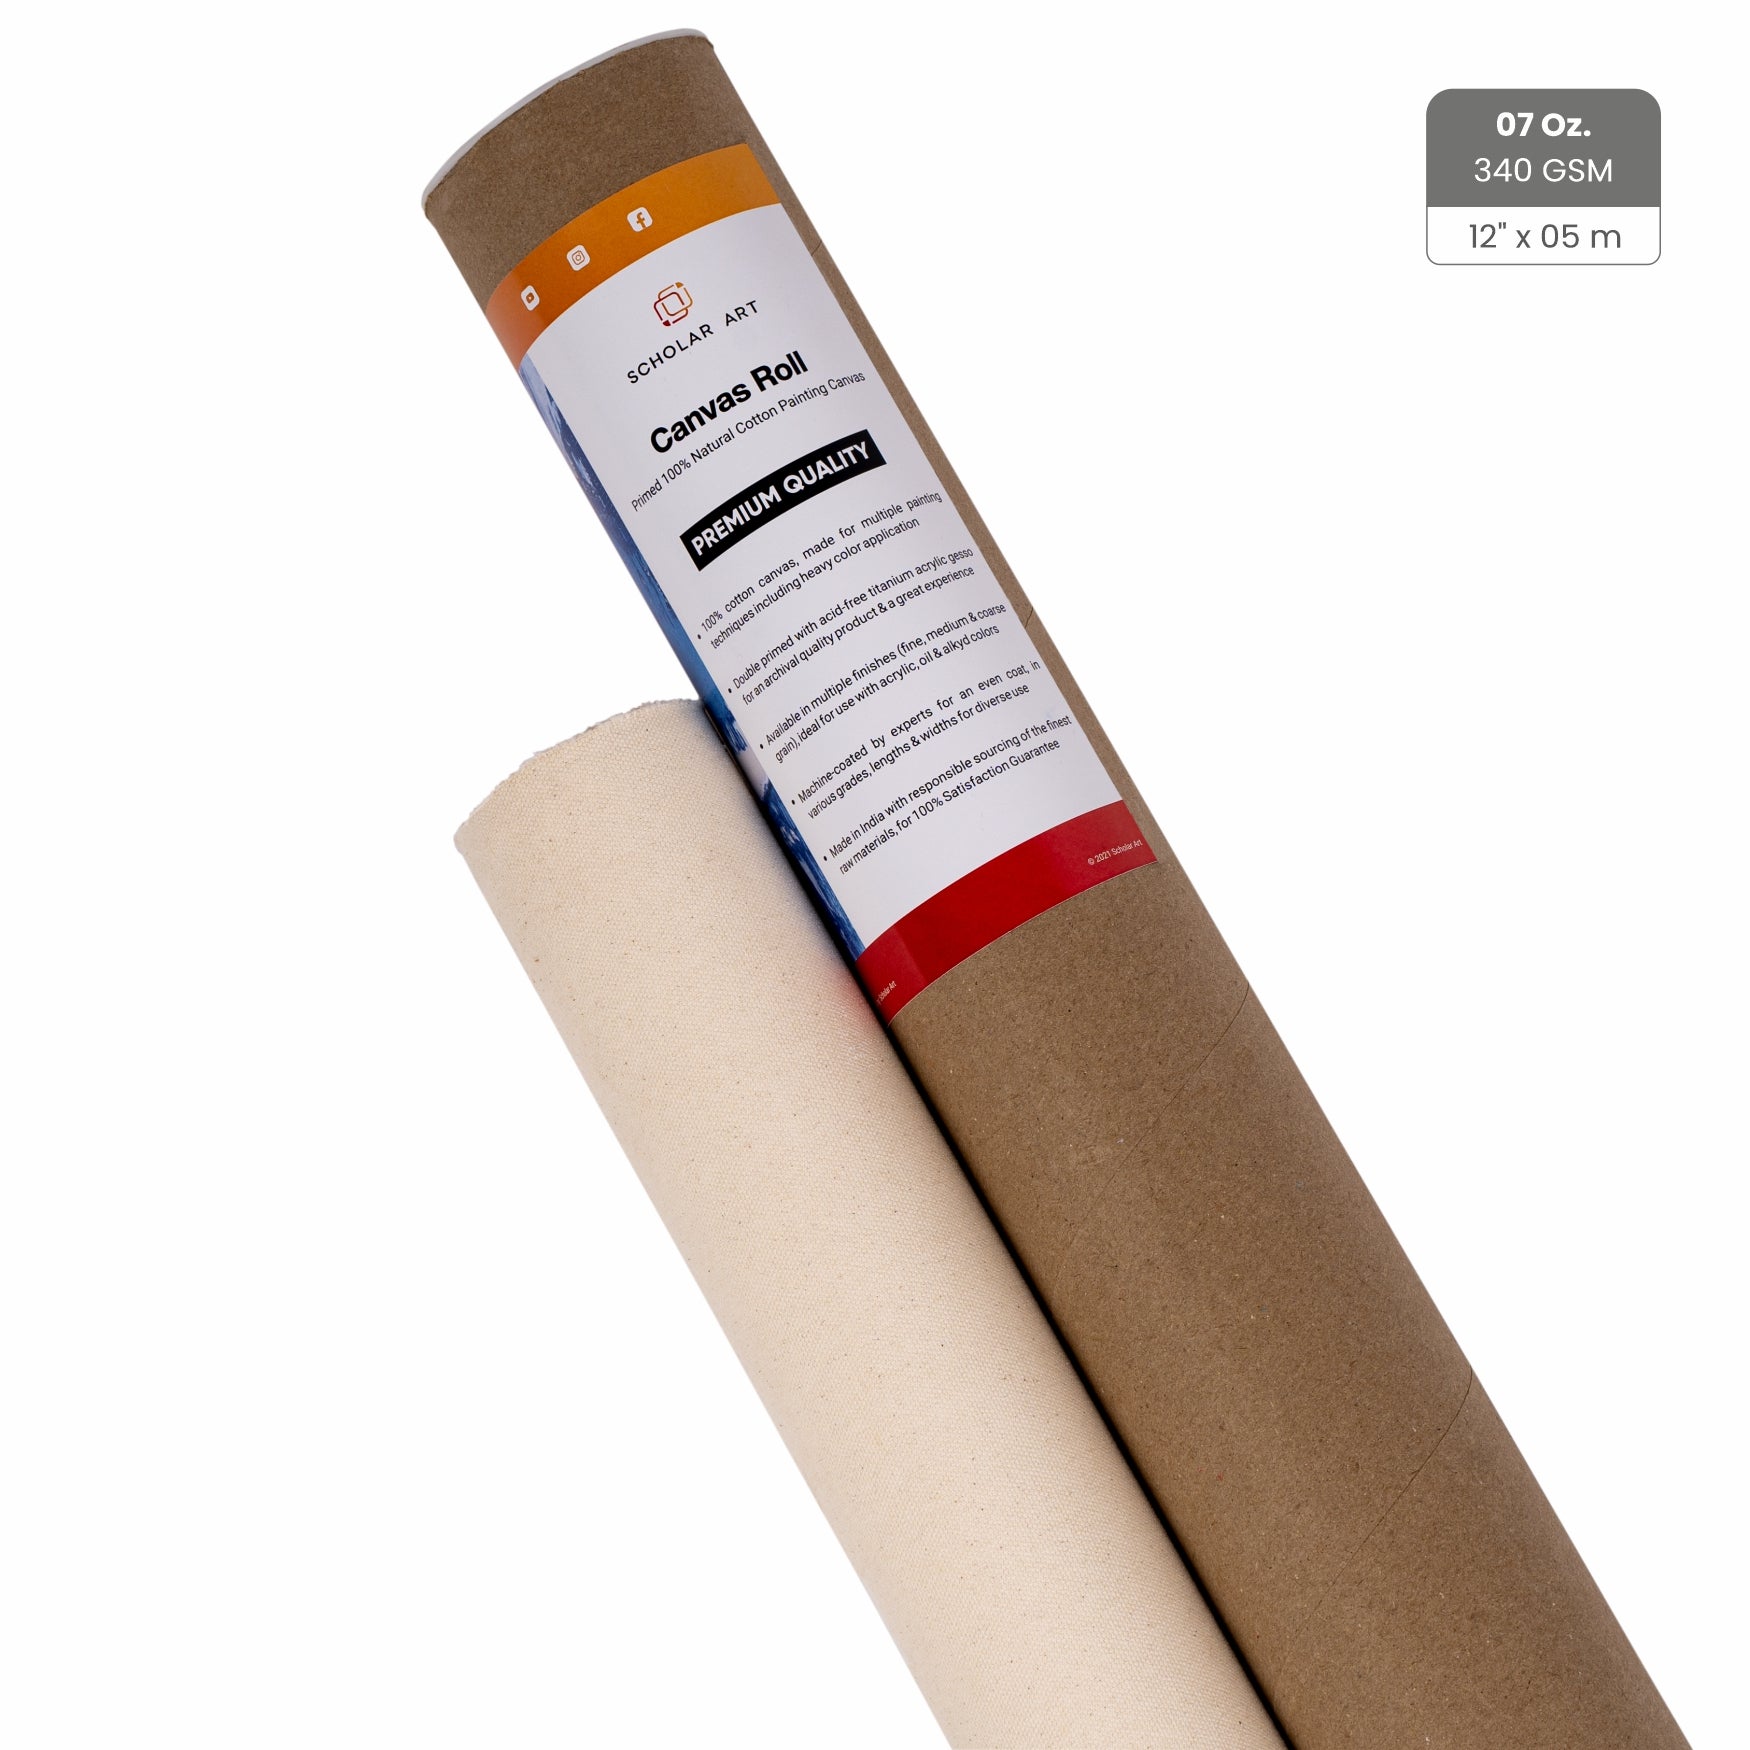 07 Oz (340 GSM) Medium Grain White Cotton Canvas Roll for Painting